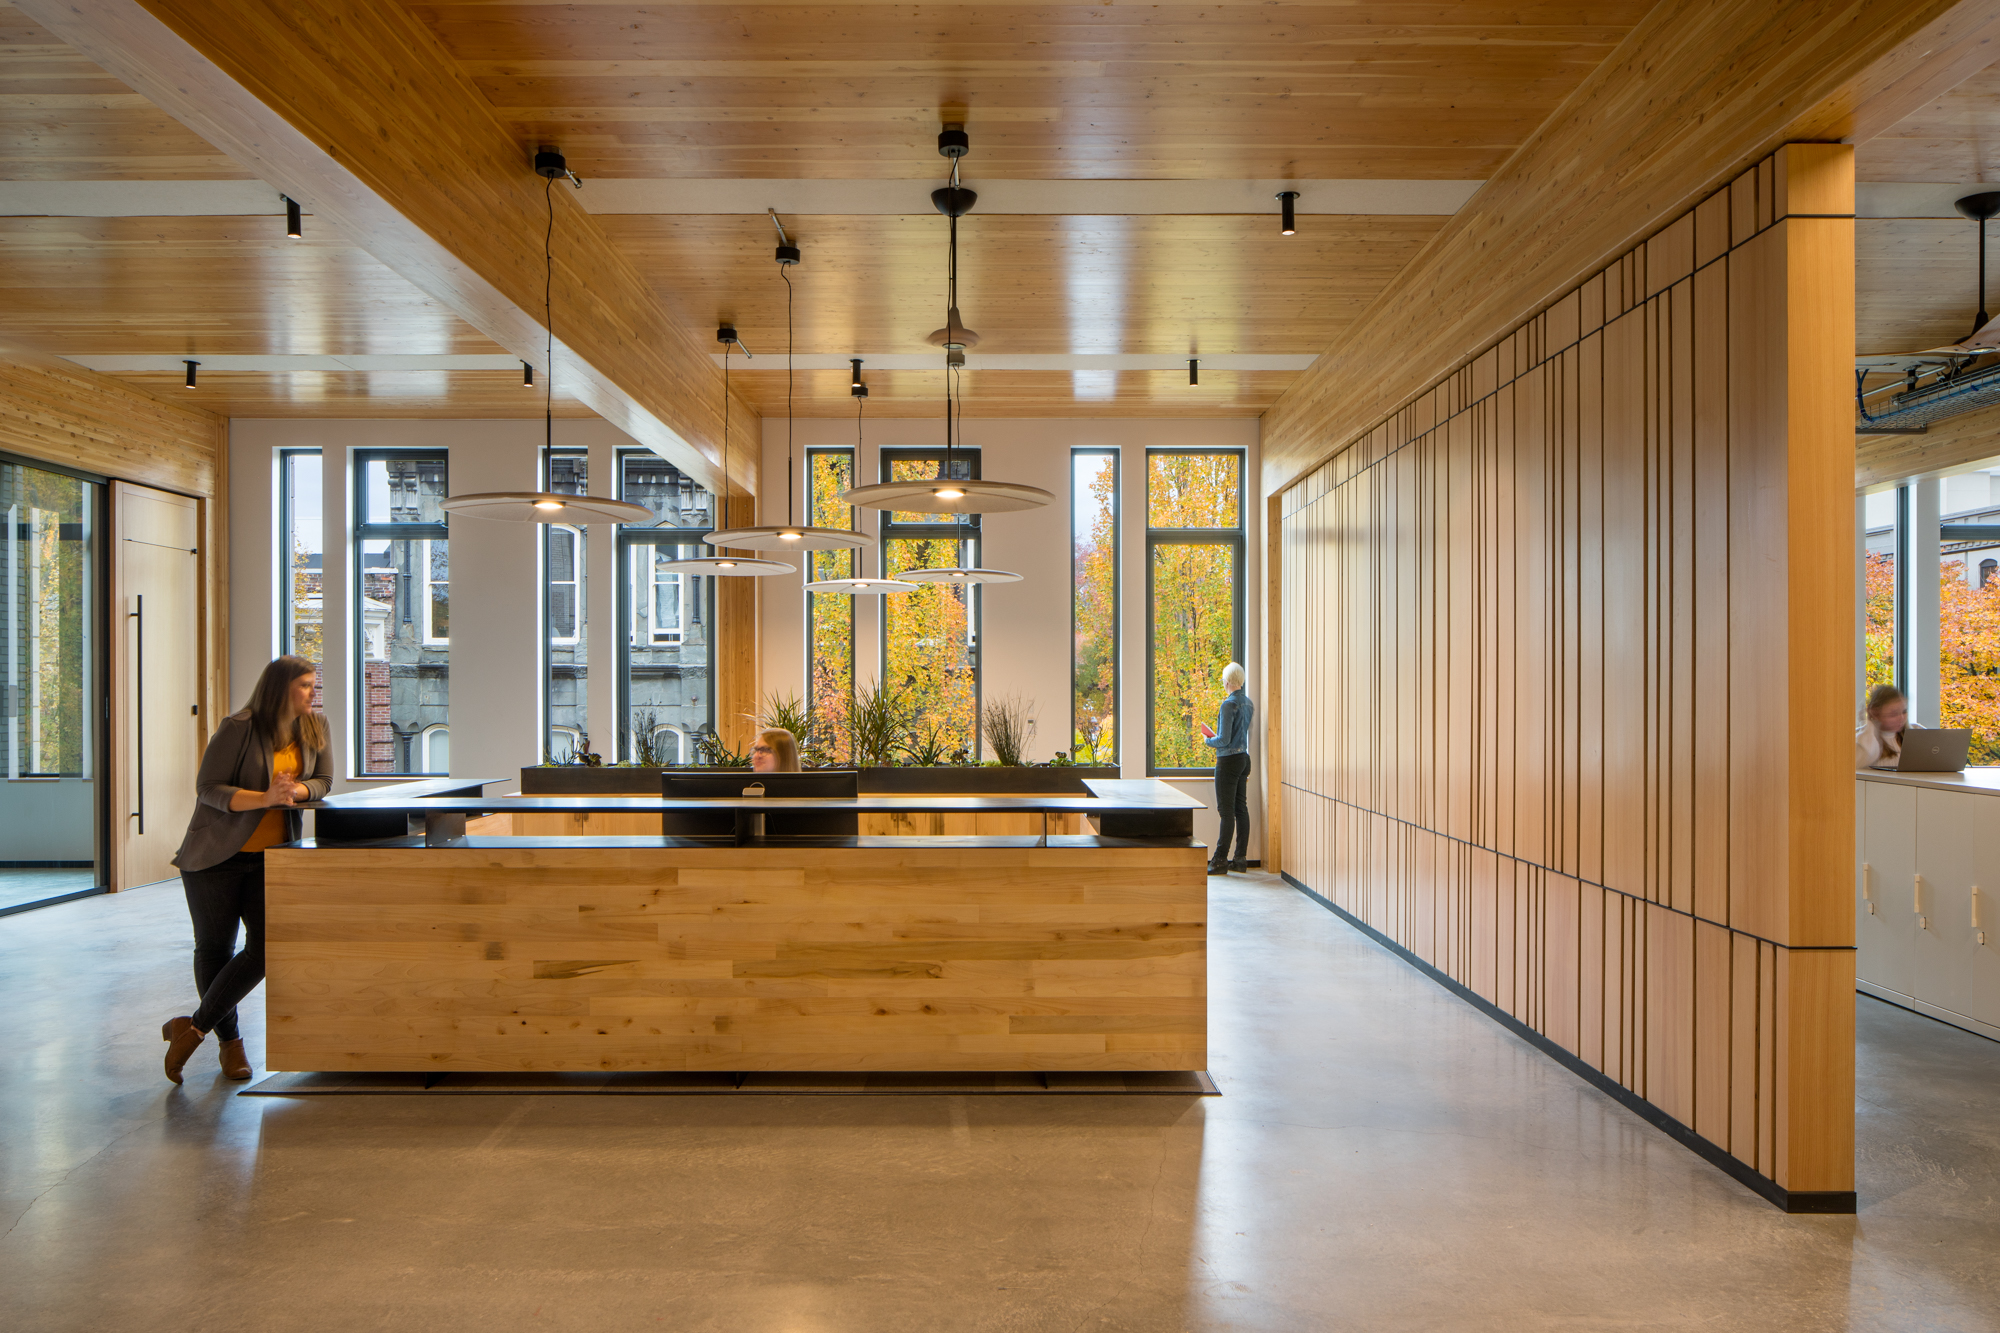 Luma's lighting and lighting control played a large role in occupant health, comfort, and the overall energy efficiency of the PAE Living Building.